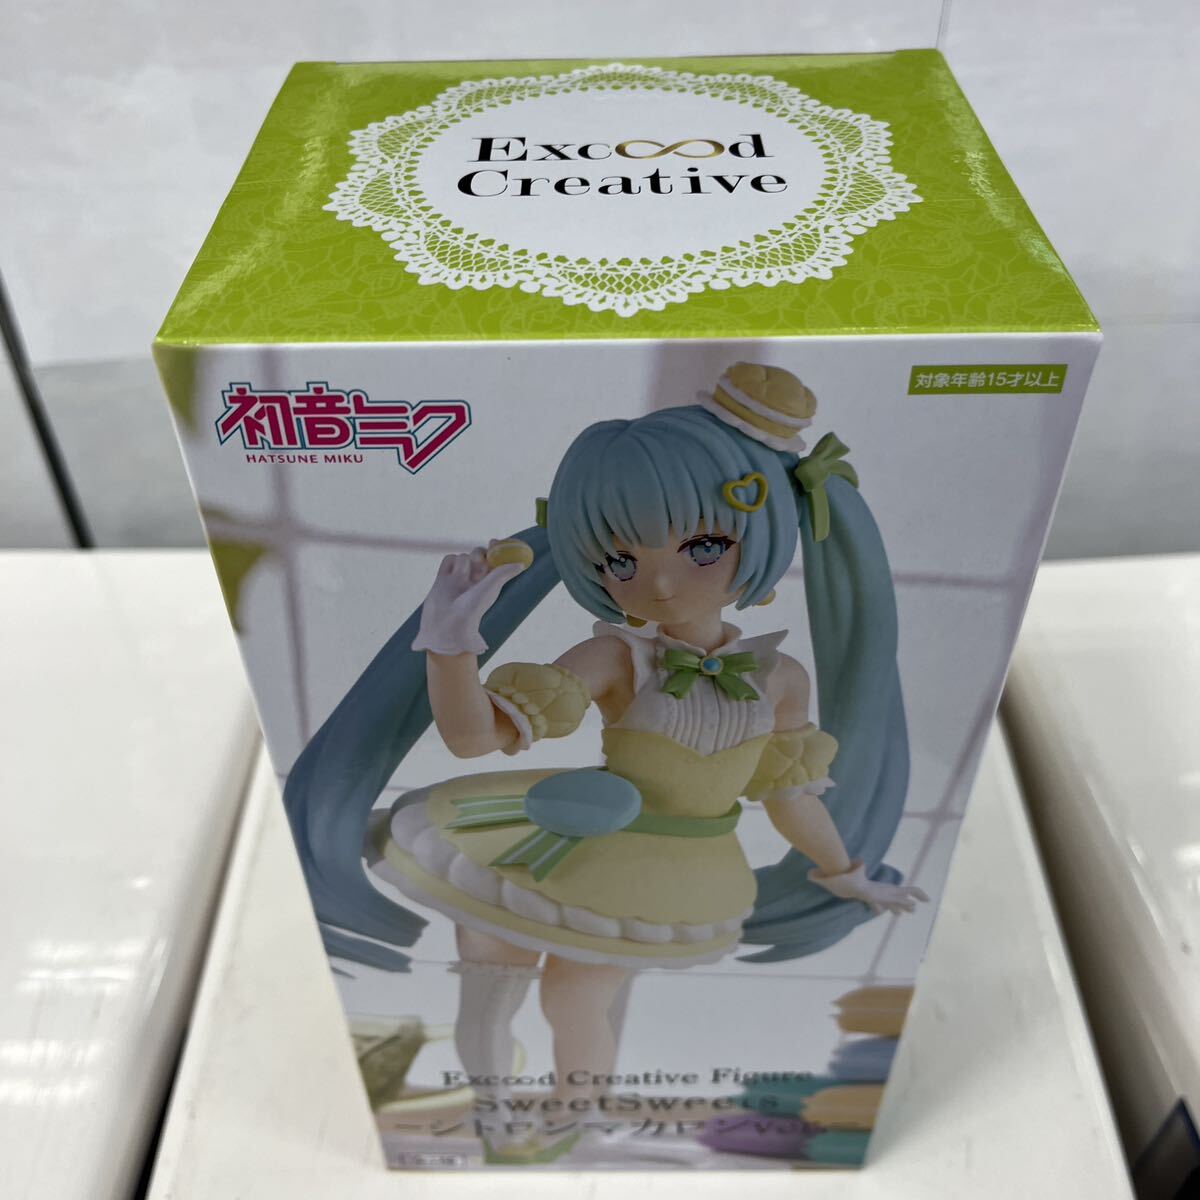 H747【未開封新品】「キャラクター・ボーカル・シリーズ 01 初音ミク」 Exc∞d Creative Figure SweetSweets-シトロンマカロンver.-_画像2